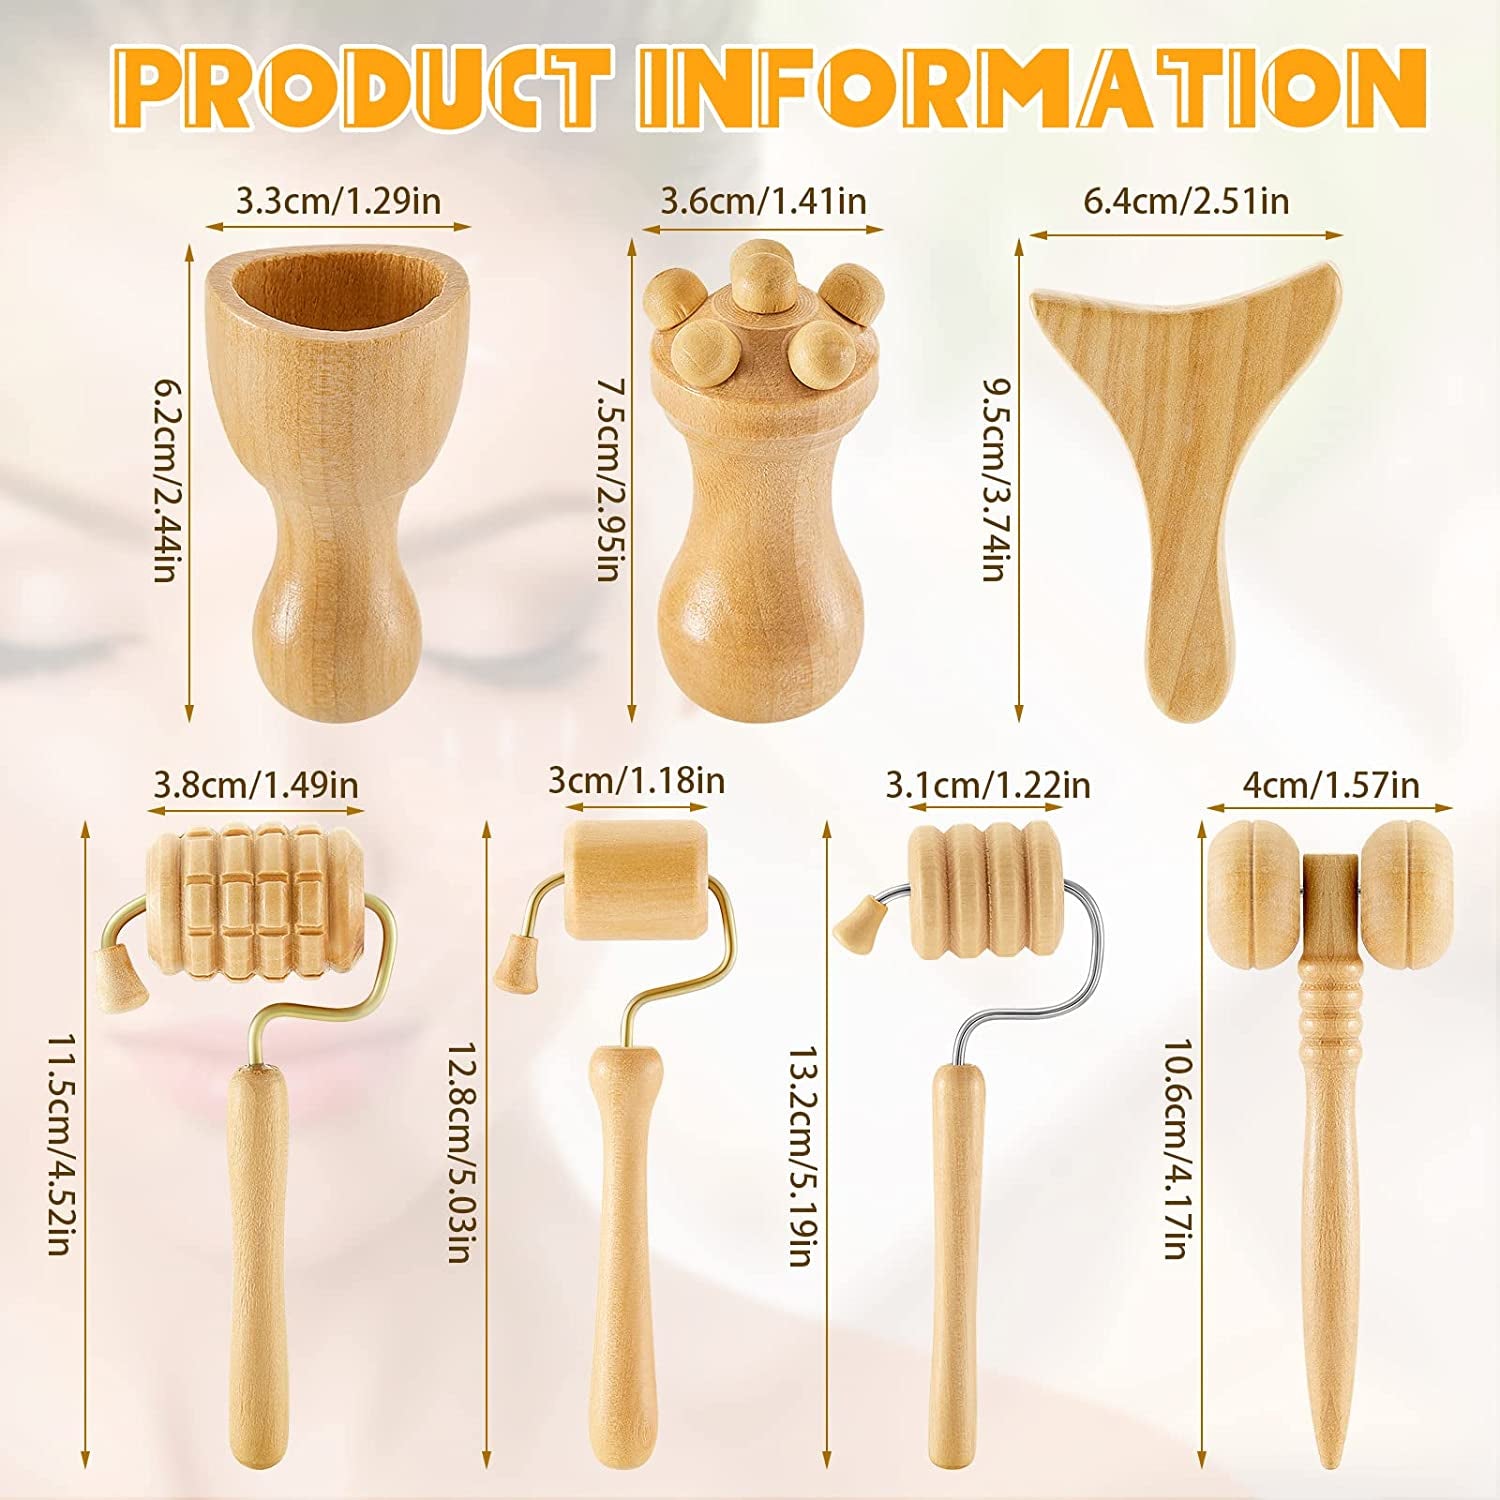 7 Pcs Wooden Face Massage Tool Set Wood Maderoterapia Kit Face Sculpting Tool Skin Care Facial Massager Cupping Facial Cups Contouring Facial Roller for Releasing Fatigue Women Girls, 7 Styles